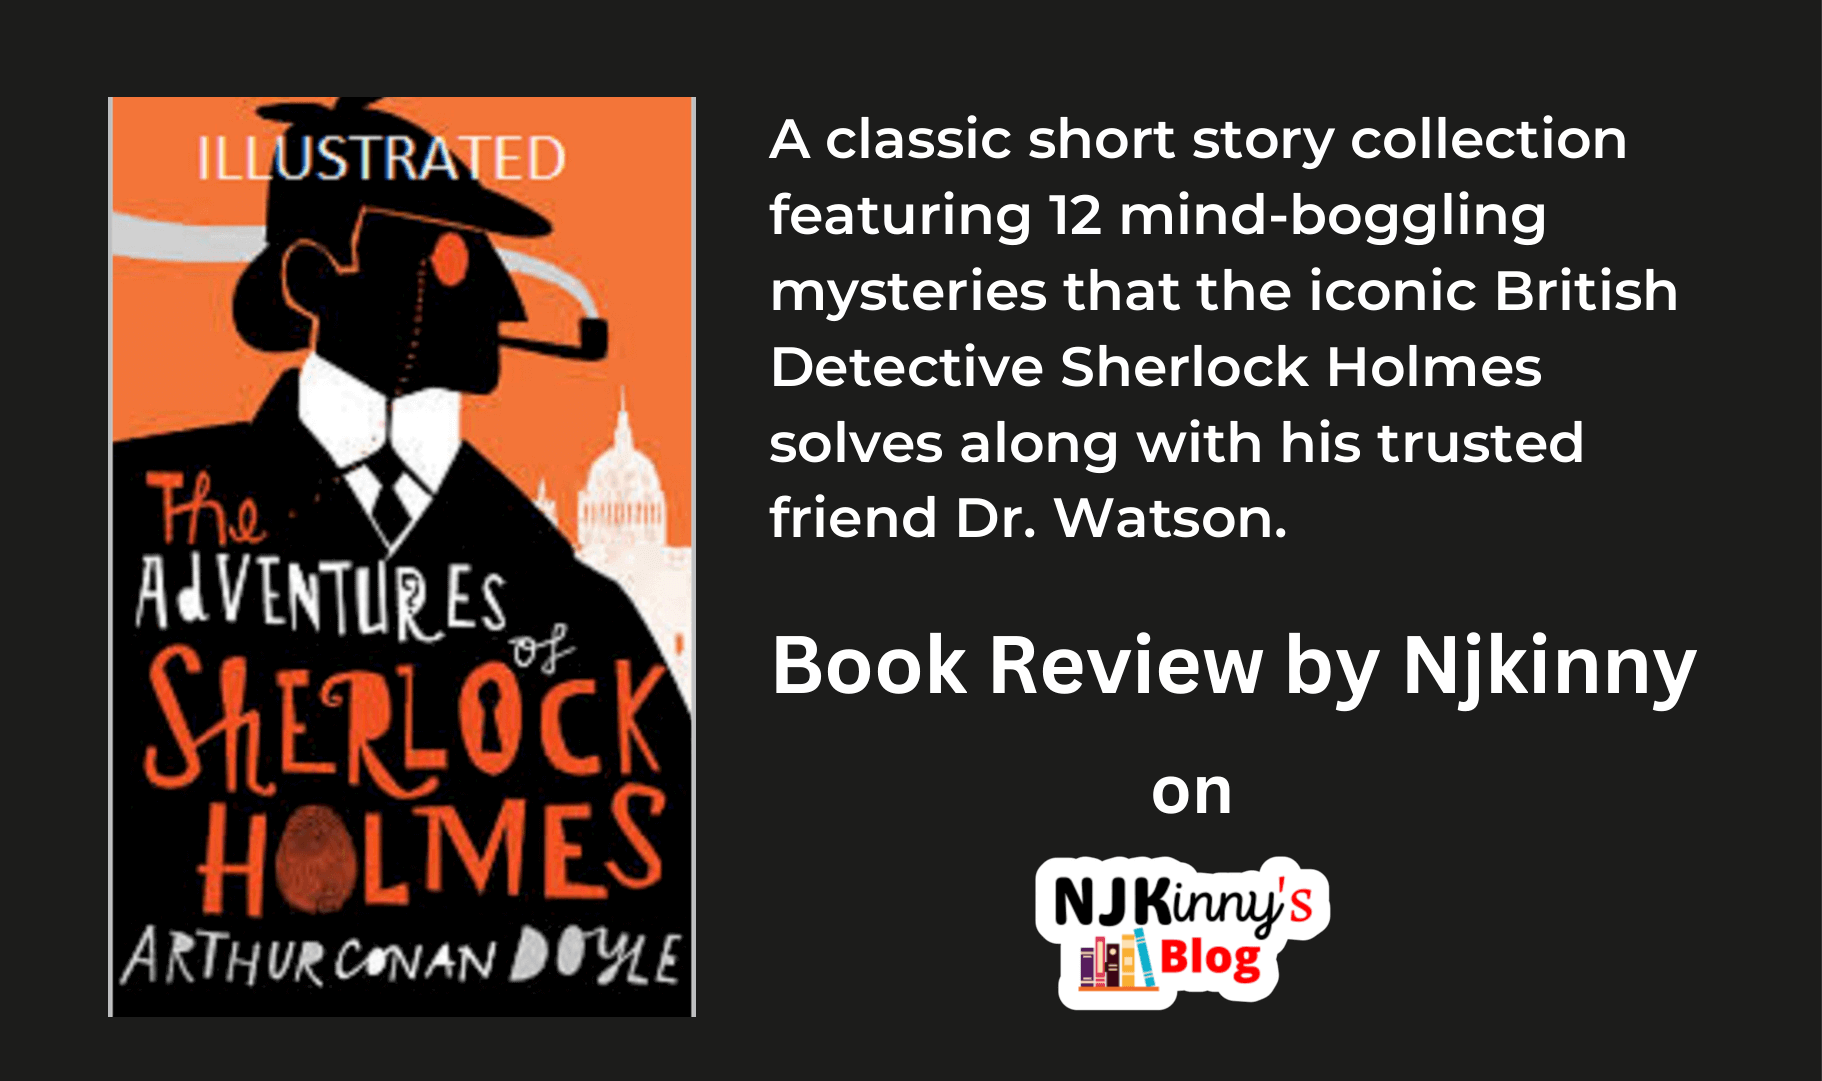 The Adventures of Sherlock Holmes | Arthur Conan Doyle | Book Review | Mystery Short Story Collection